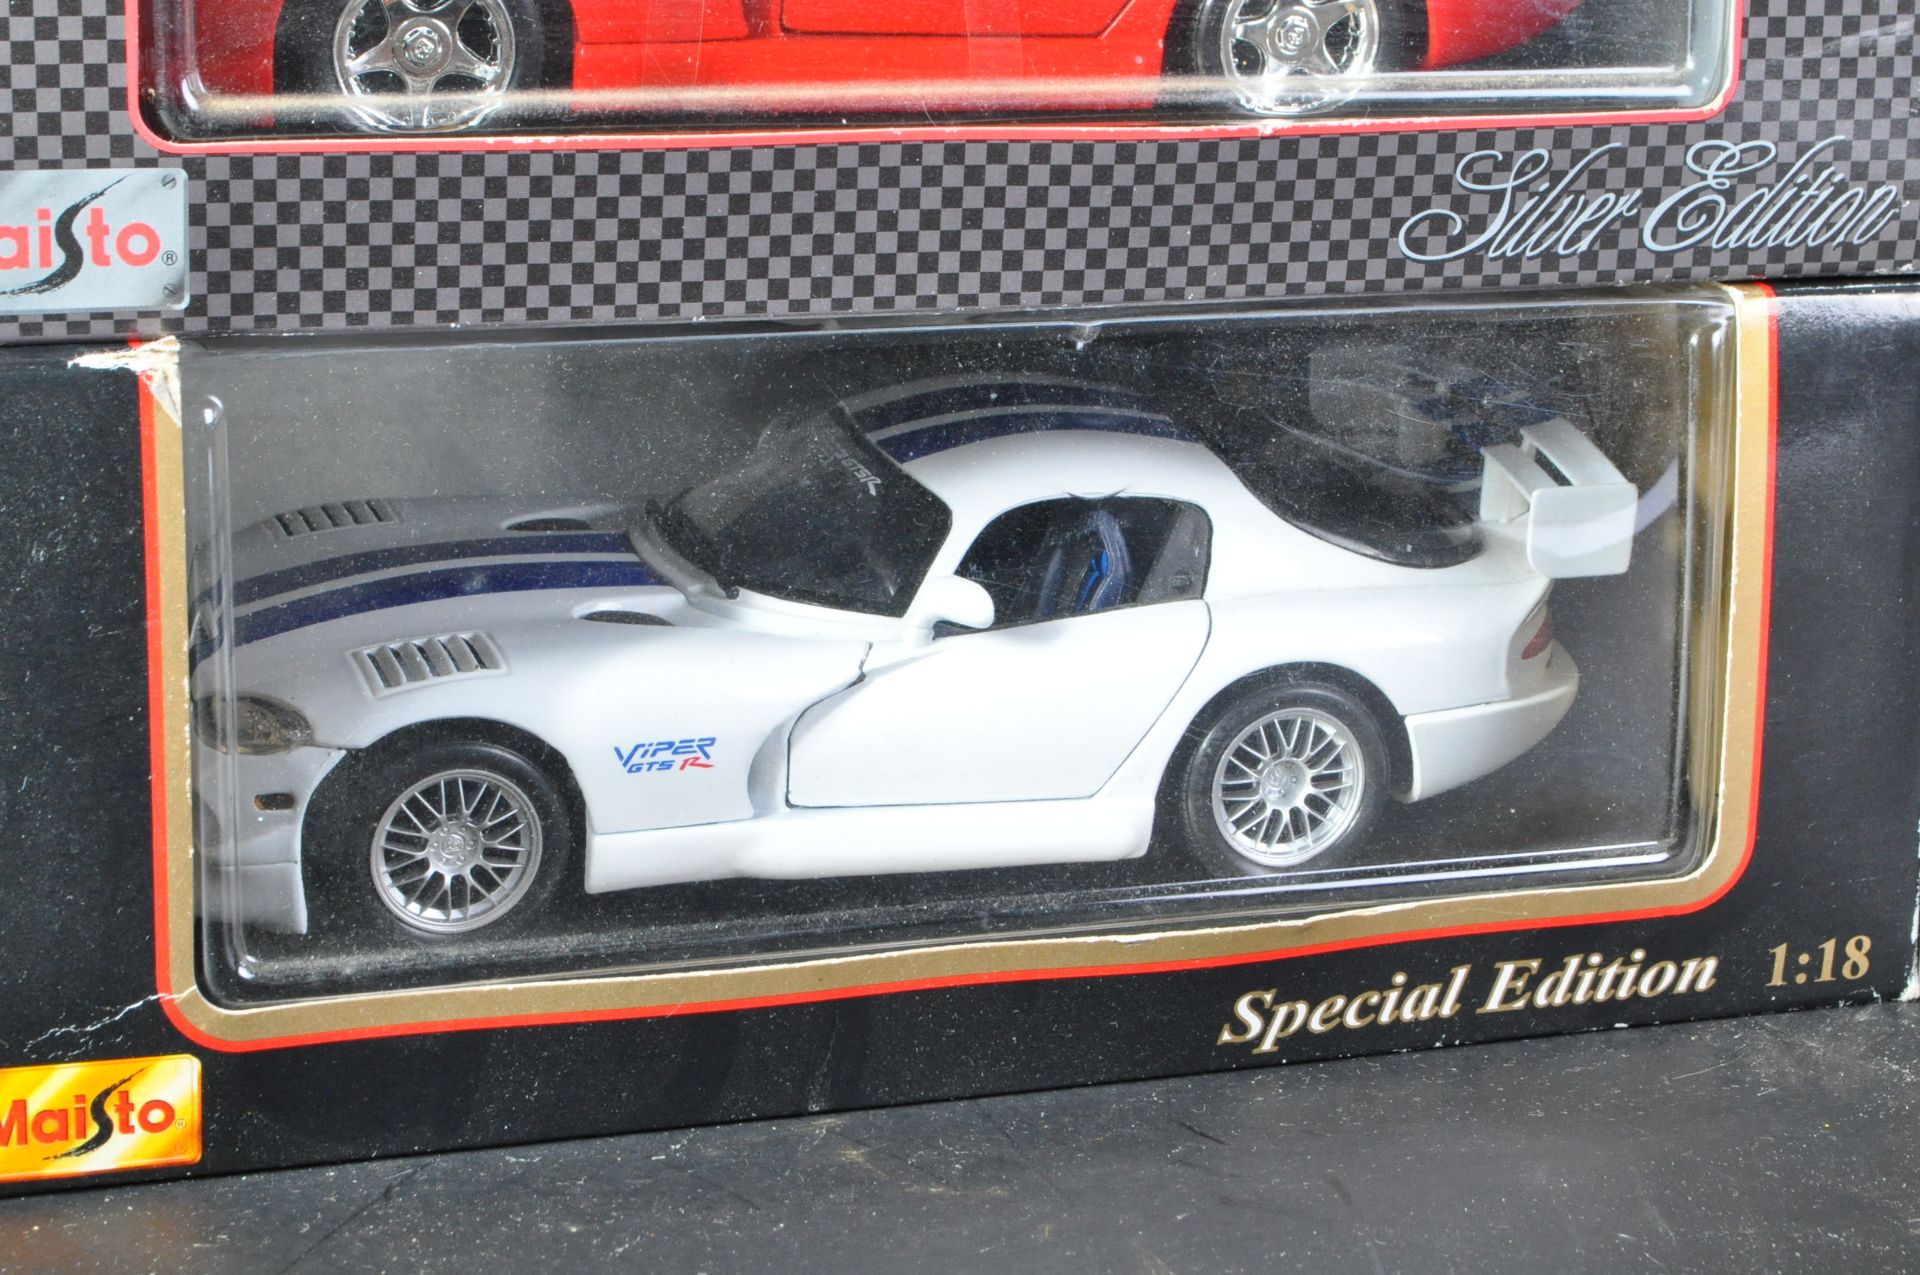 COLLECTION OF X4 MAISTO 1/18 SCALE DIECAST MODEL CARS - Image 3 of 5